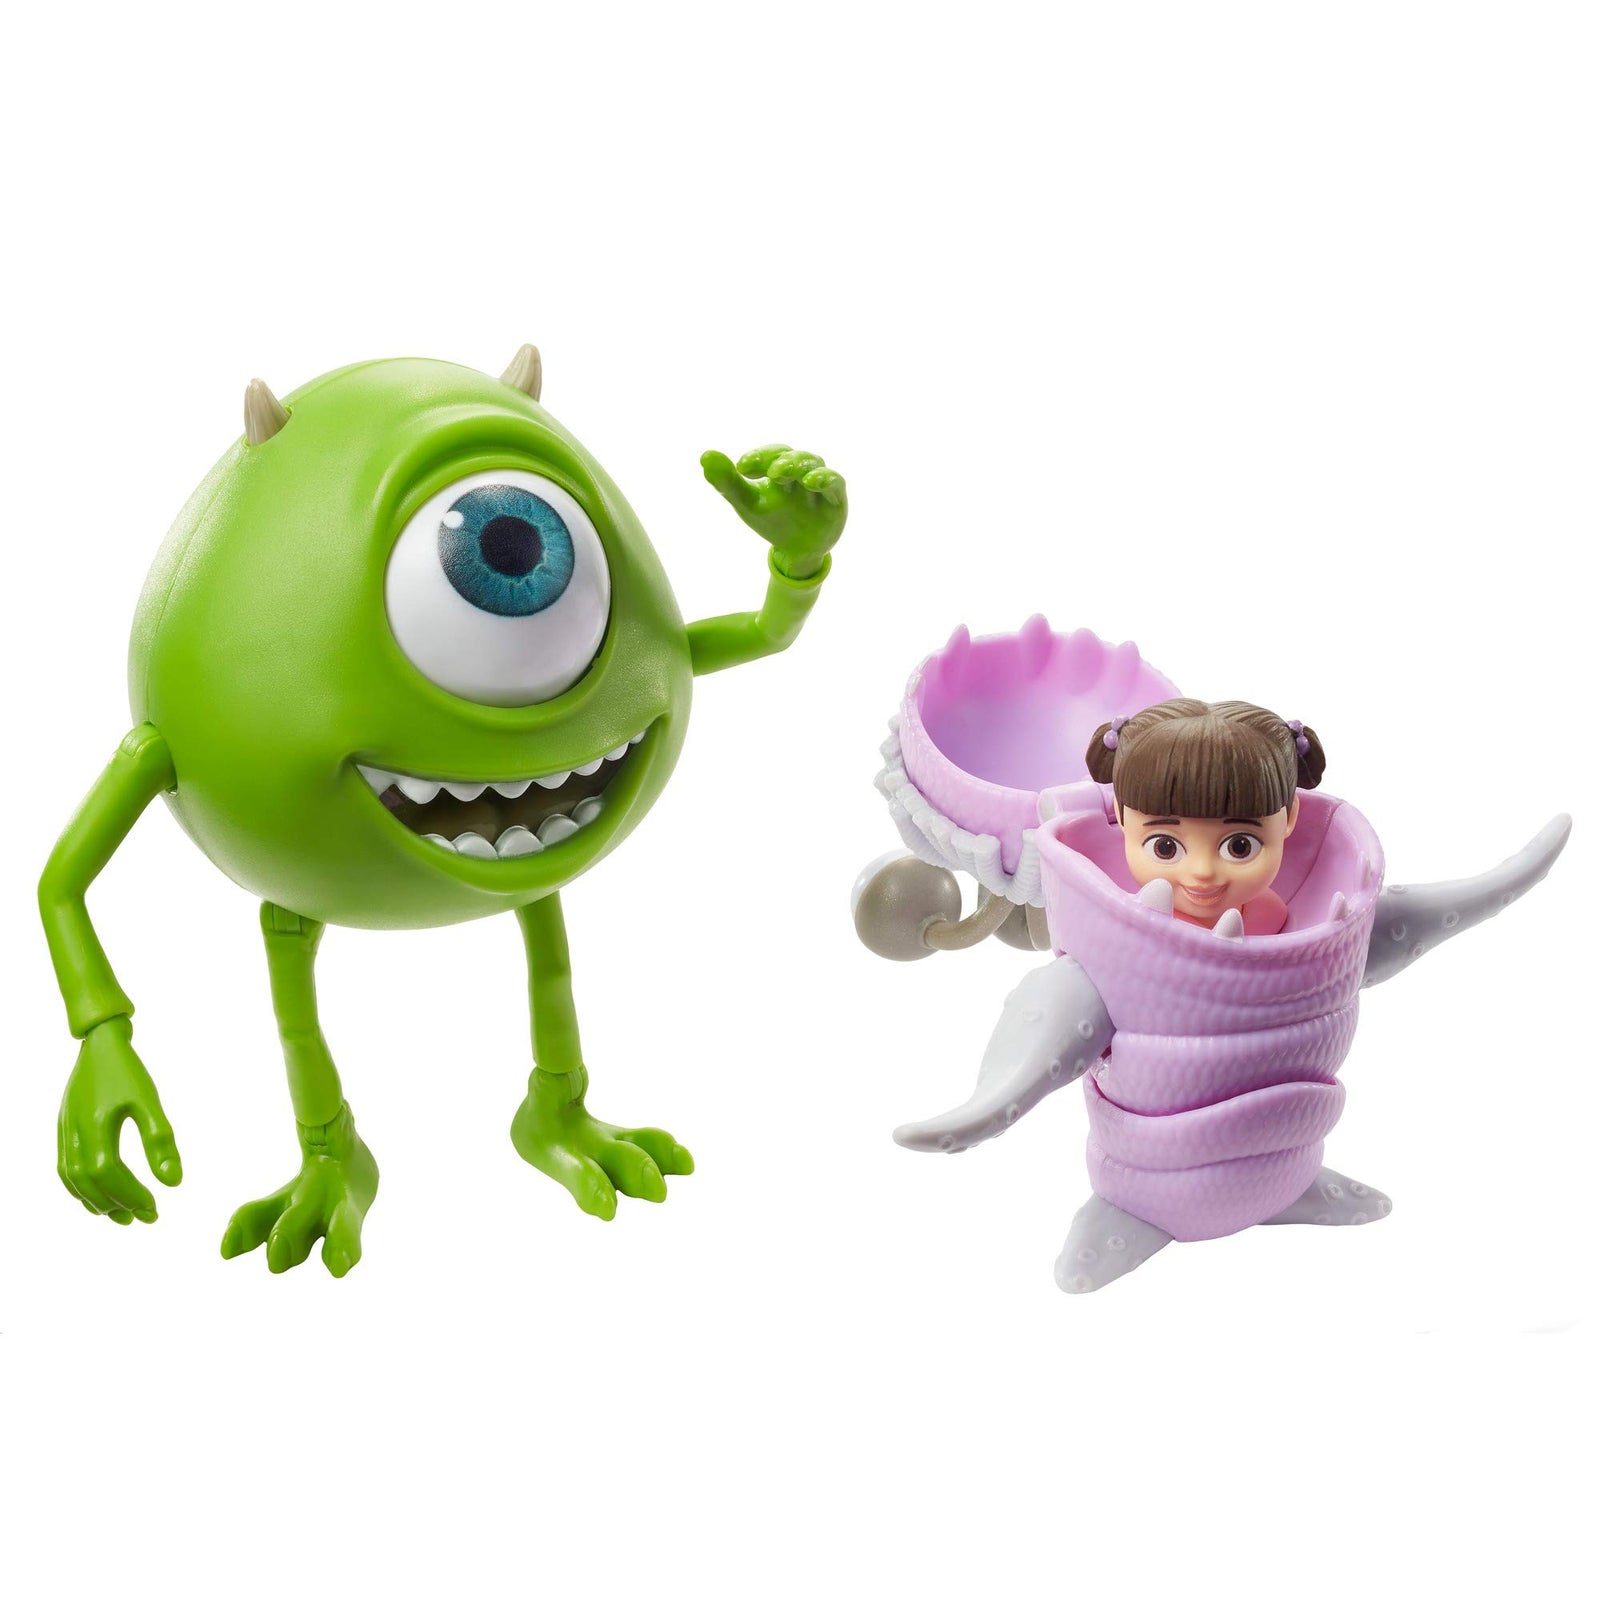 Pixar Mattel Mike and Boo Monsters, Inc. Character Action Dolls Highly Posable with Authentic Designs for Storytelling, Collecting, Movie Toys for Kids Gift Ages 3 and Up